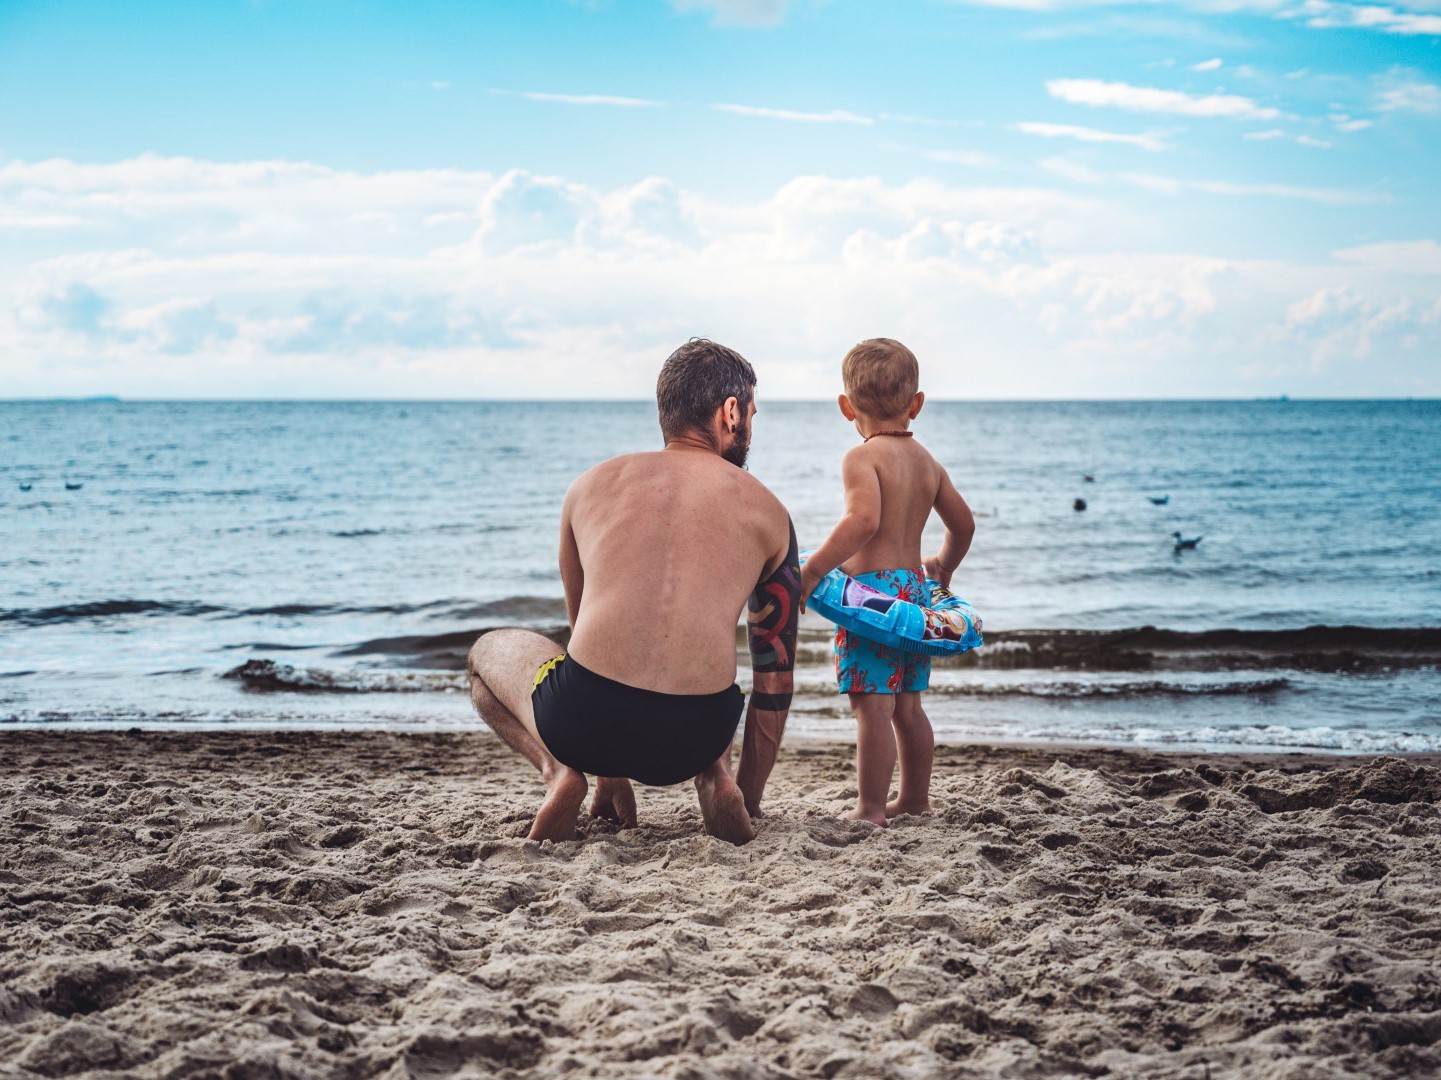 We see a father and son on the beach looking out at the sea in the image.